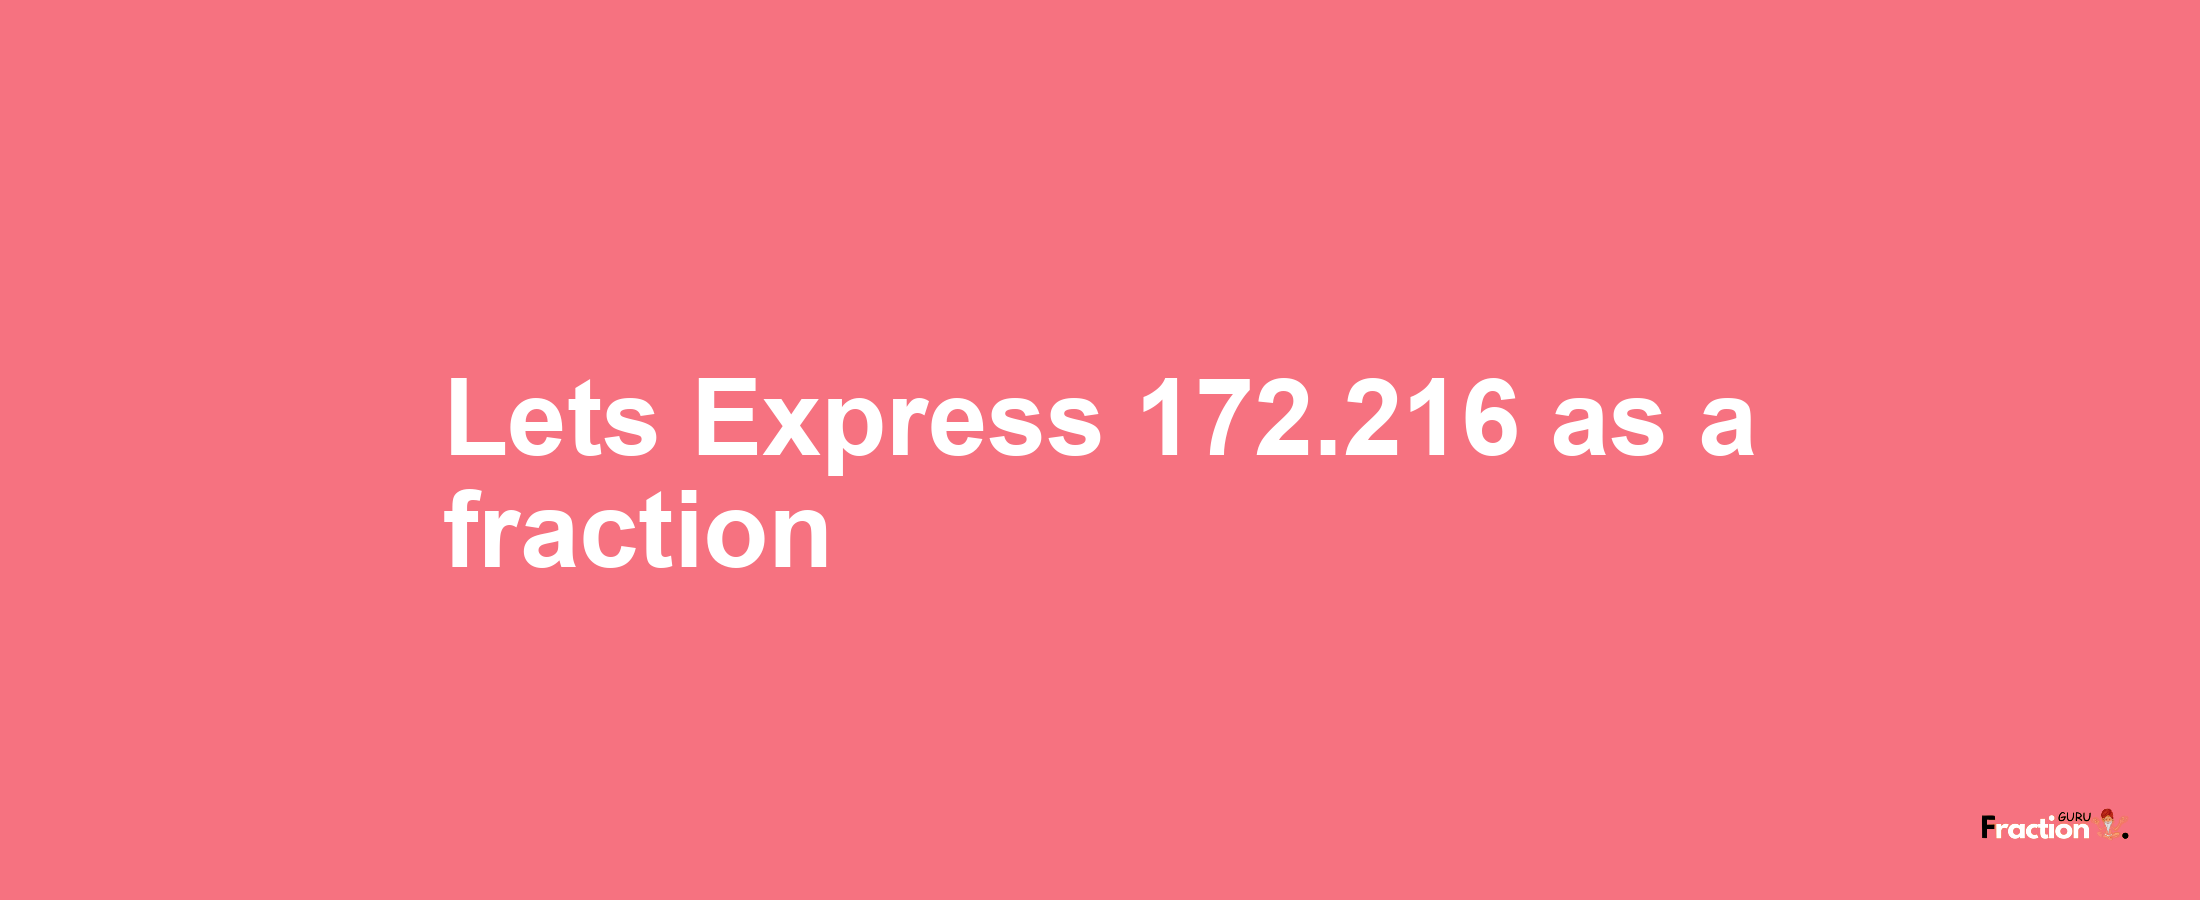 Lets Express 172.216 as afraction